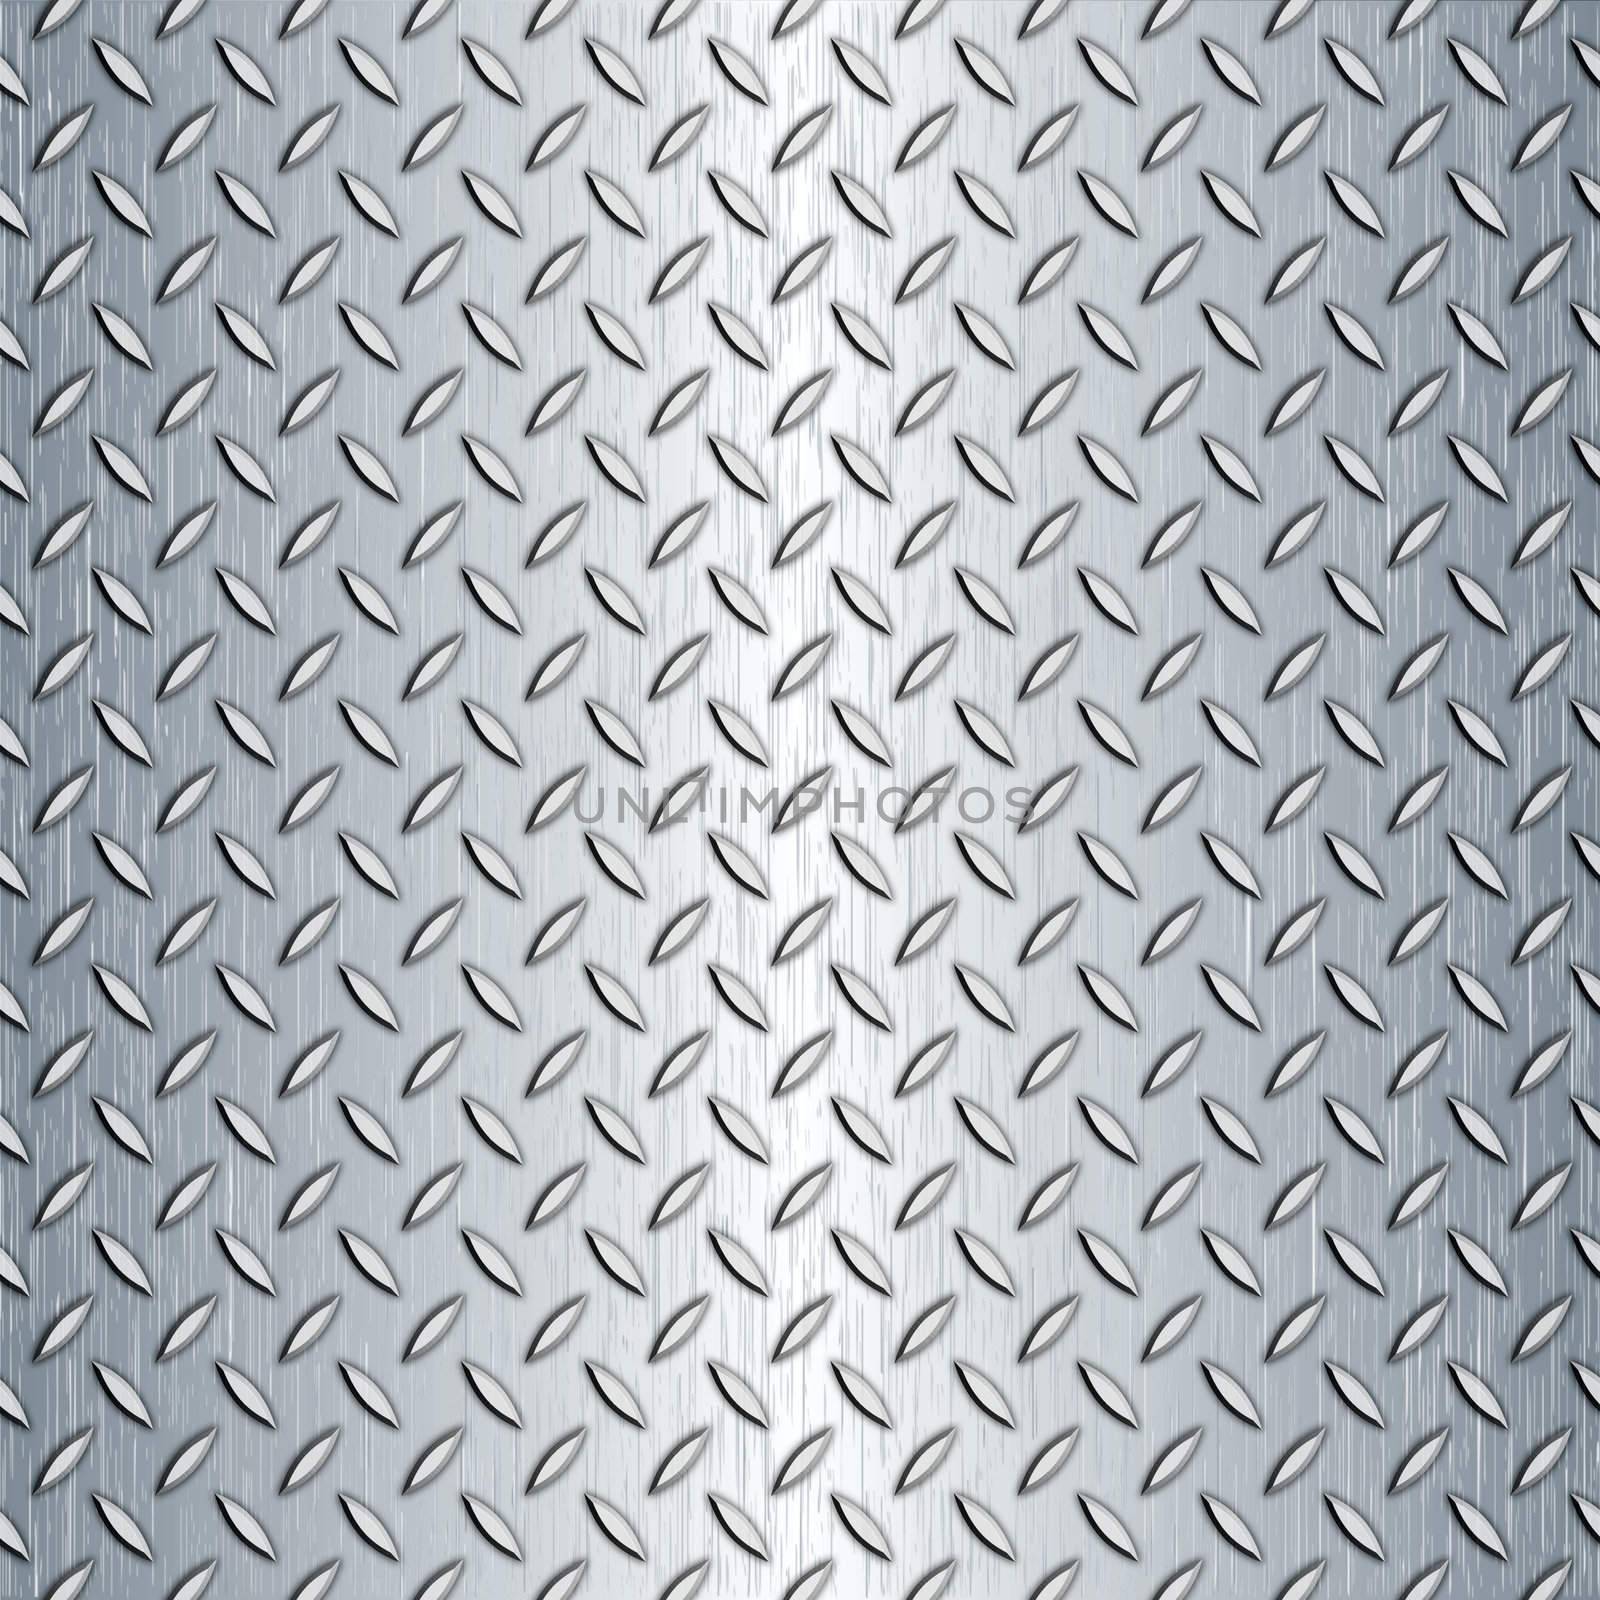 Steel diamond plate pattern. You can tile this seamlessly as a pattern to fit whatever size you need.